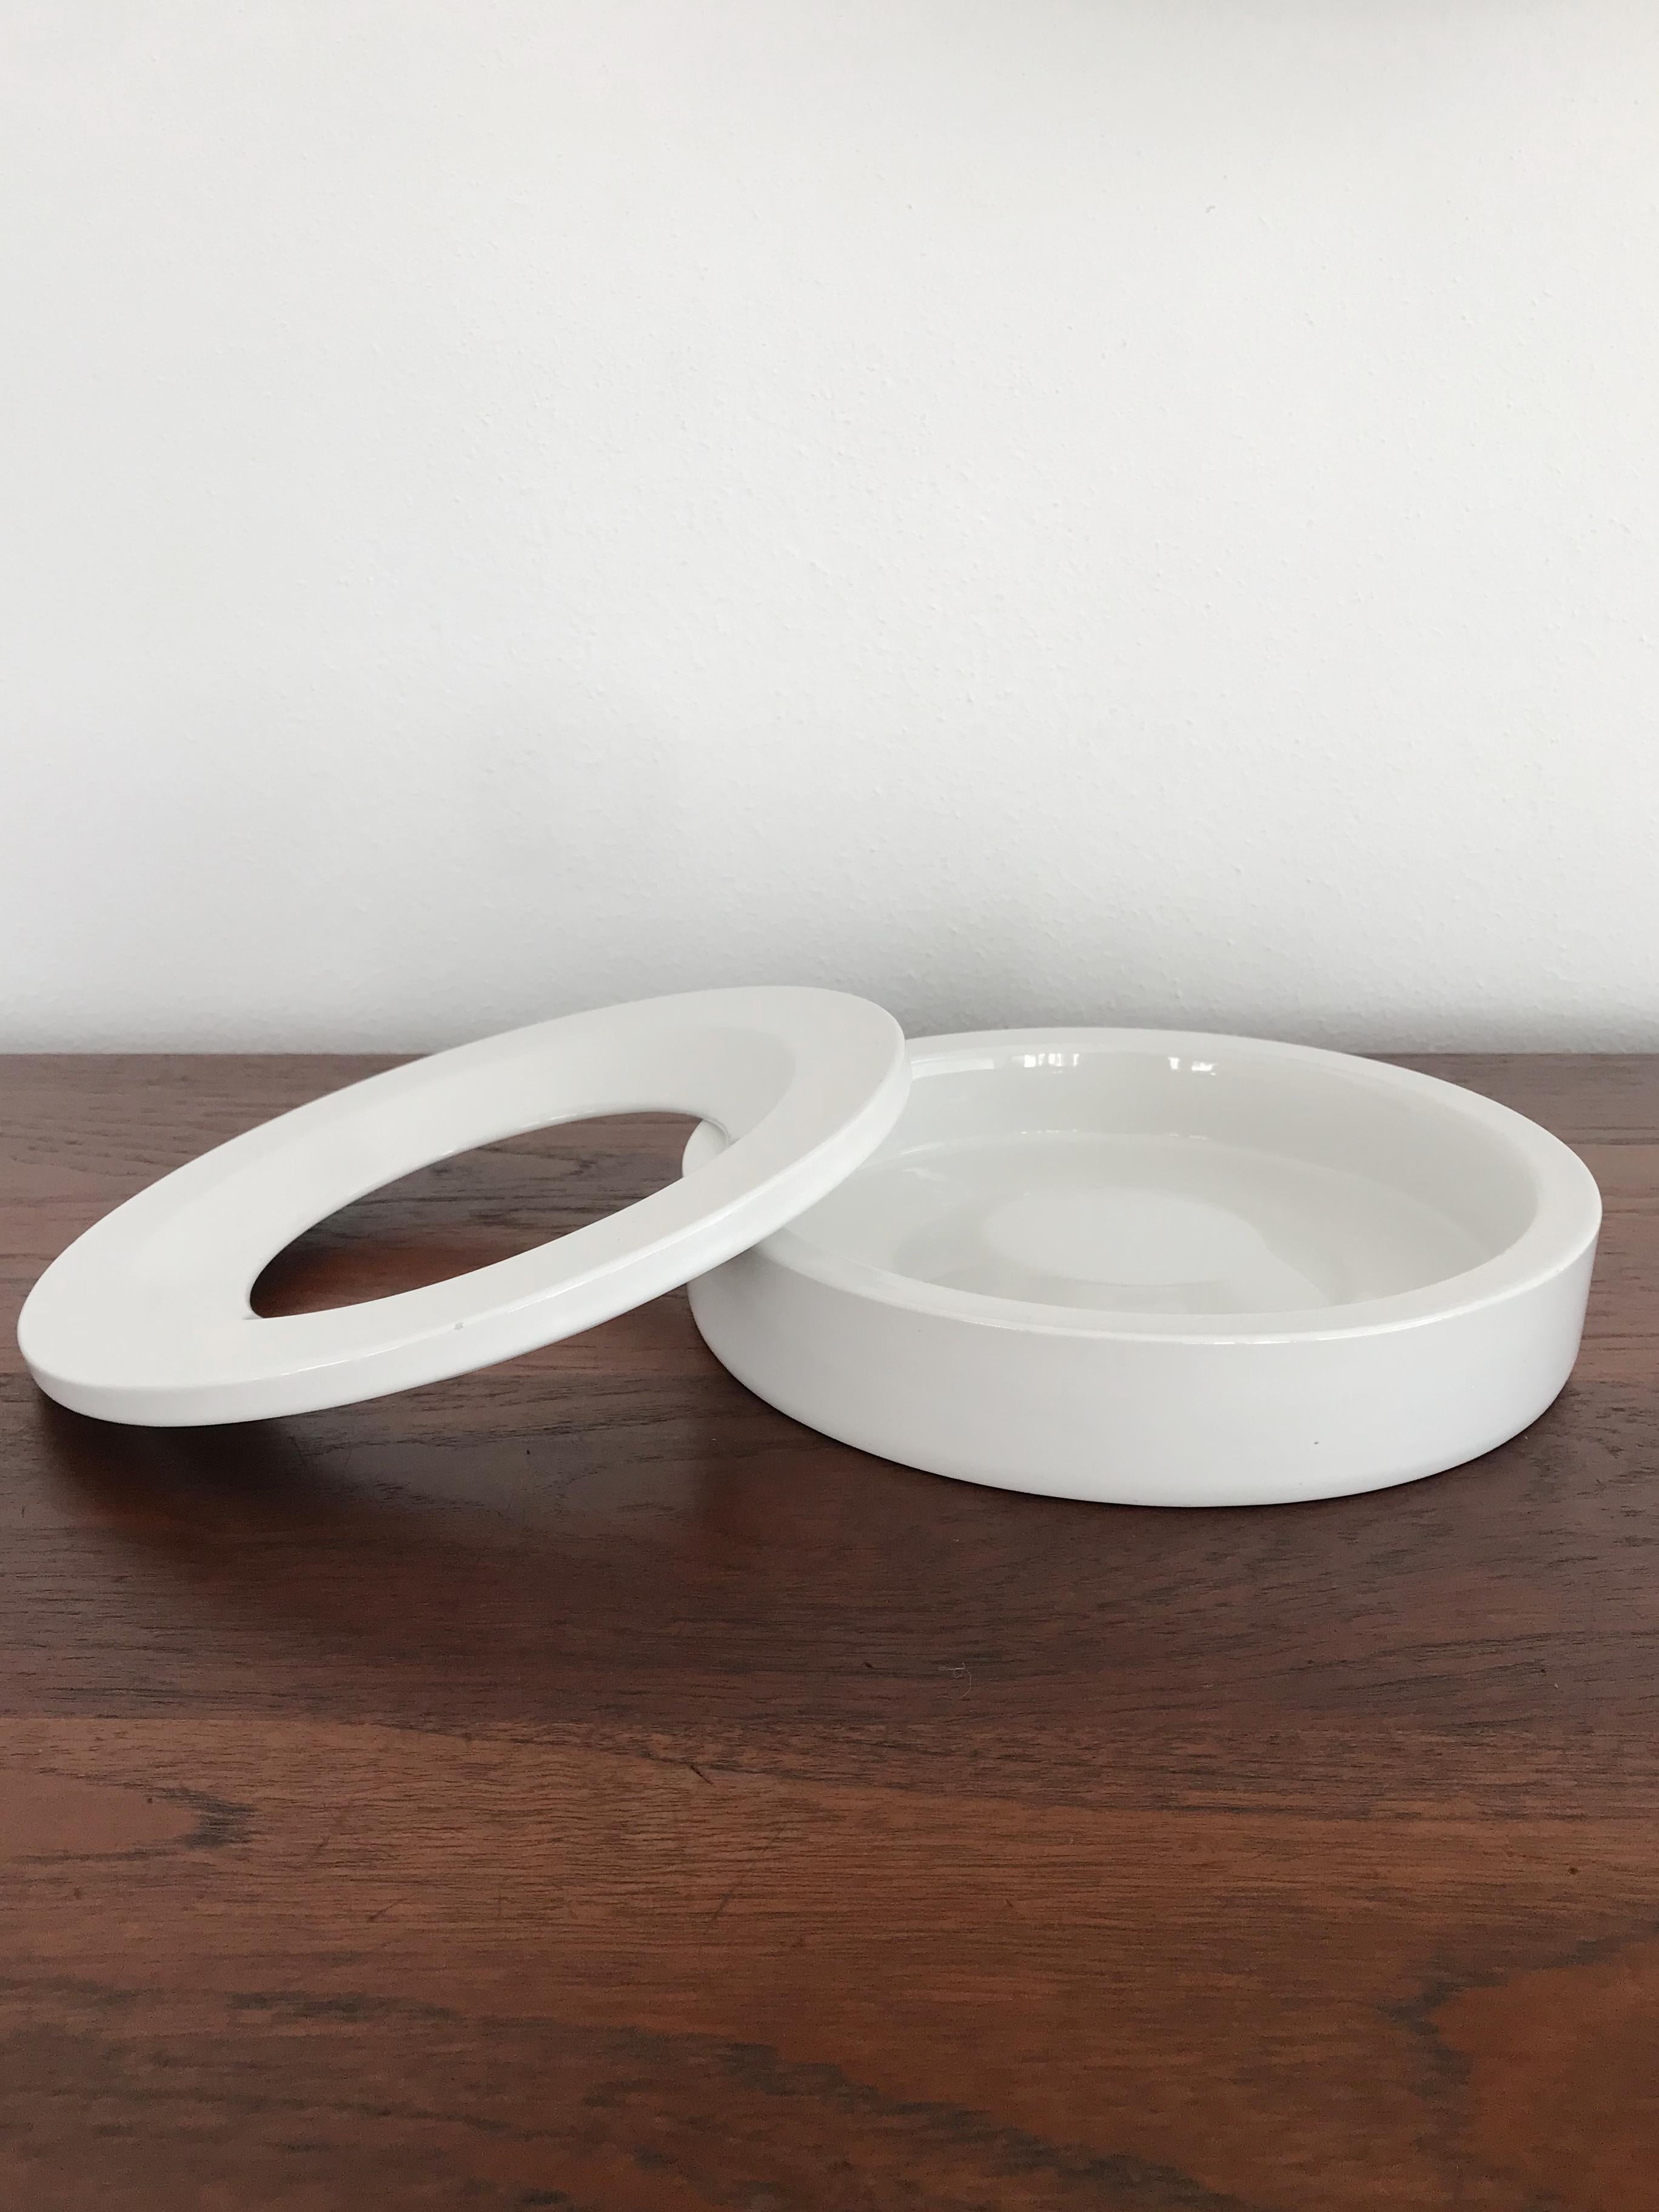 Italian midcentury moderrn design white enameled ceramic ashtray centerpiece Barbados series designed by Angelo Mangiarotti for Danese Milano in 1964, marked Danese Milano Made in Italy with the graphic symbol of the manufacture, Italy